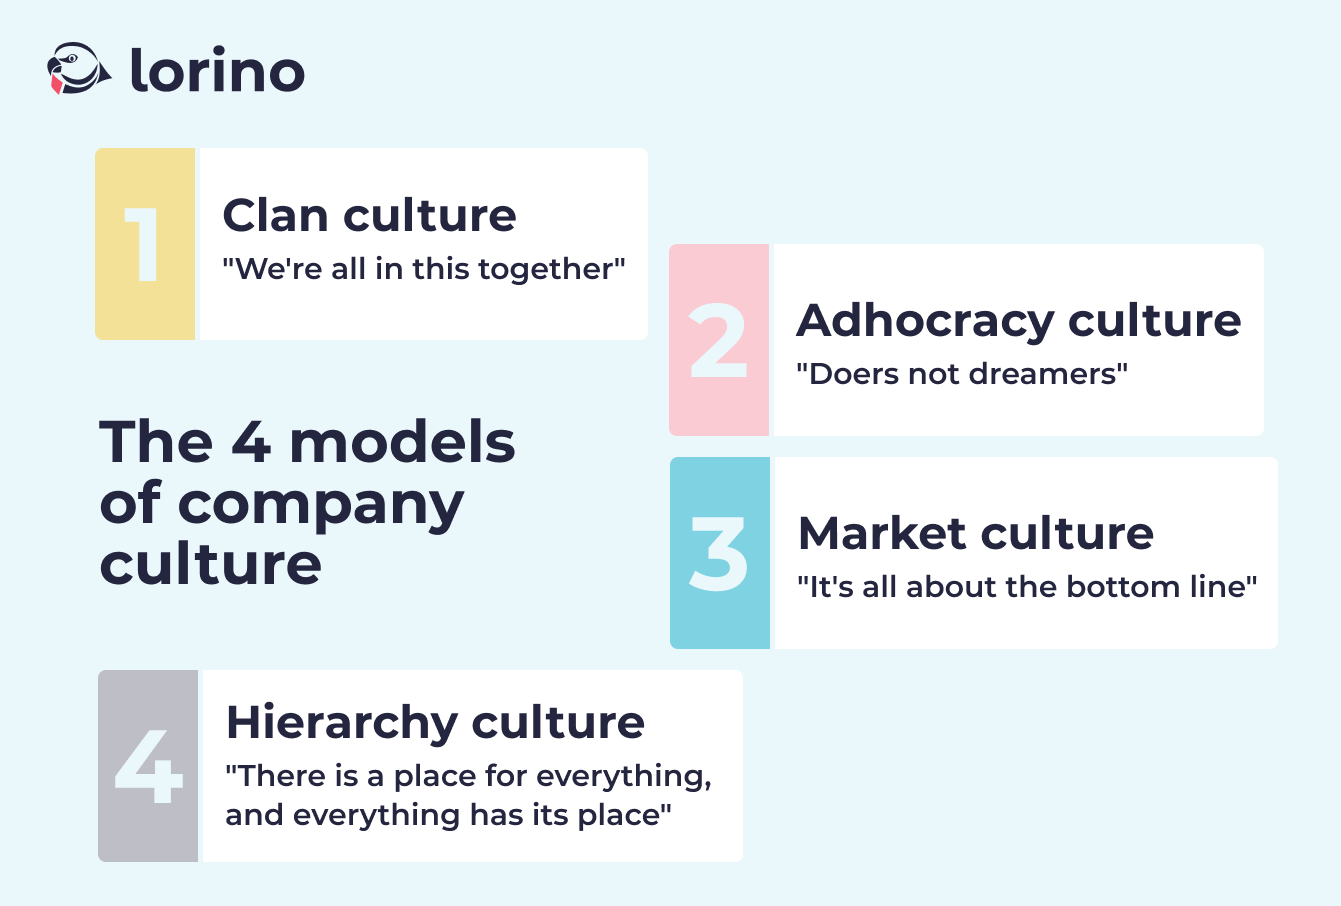 The 4 models of company culture